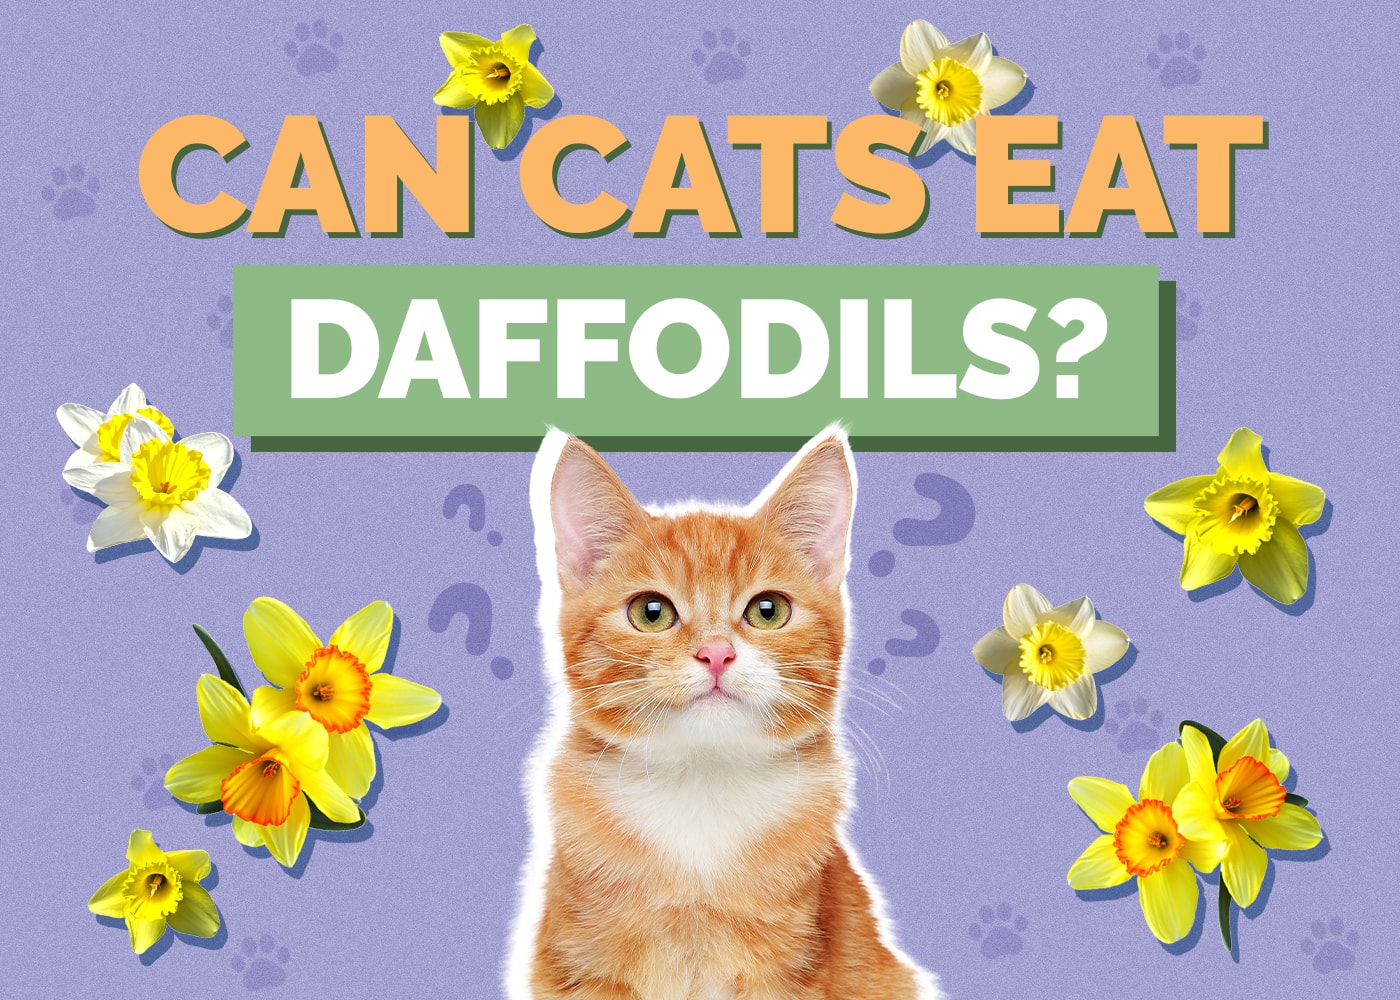 Can Cats Eat daffodils